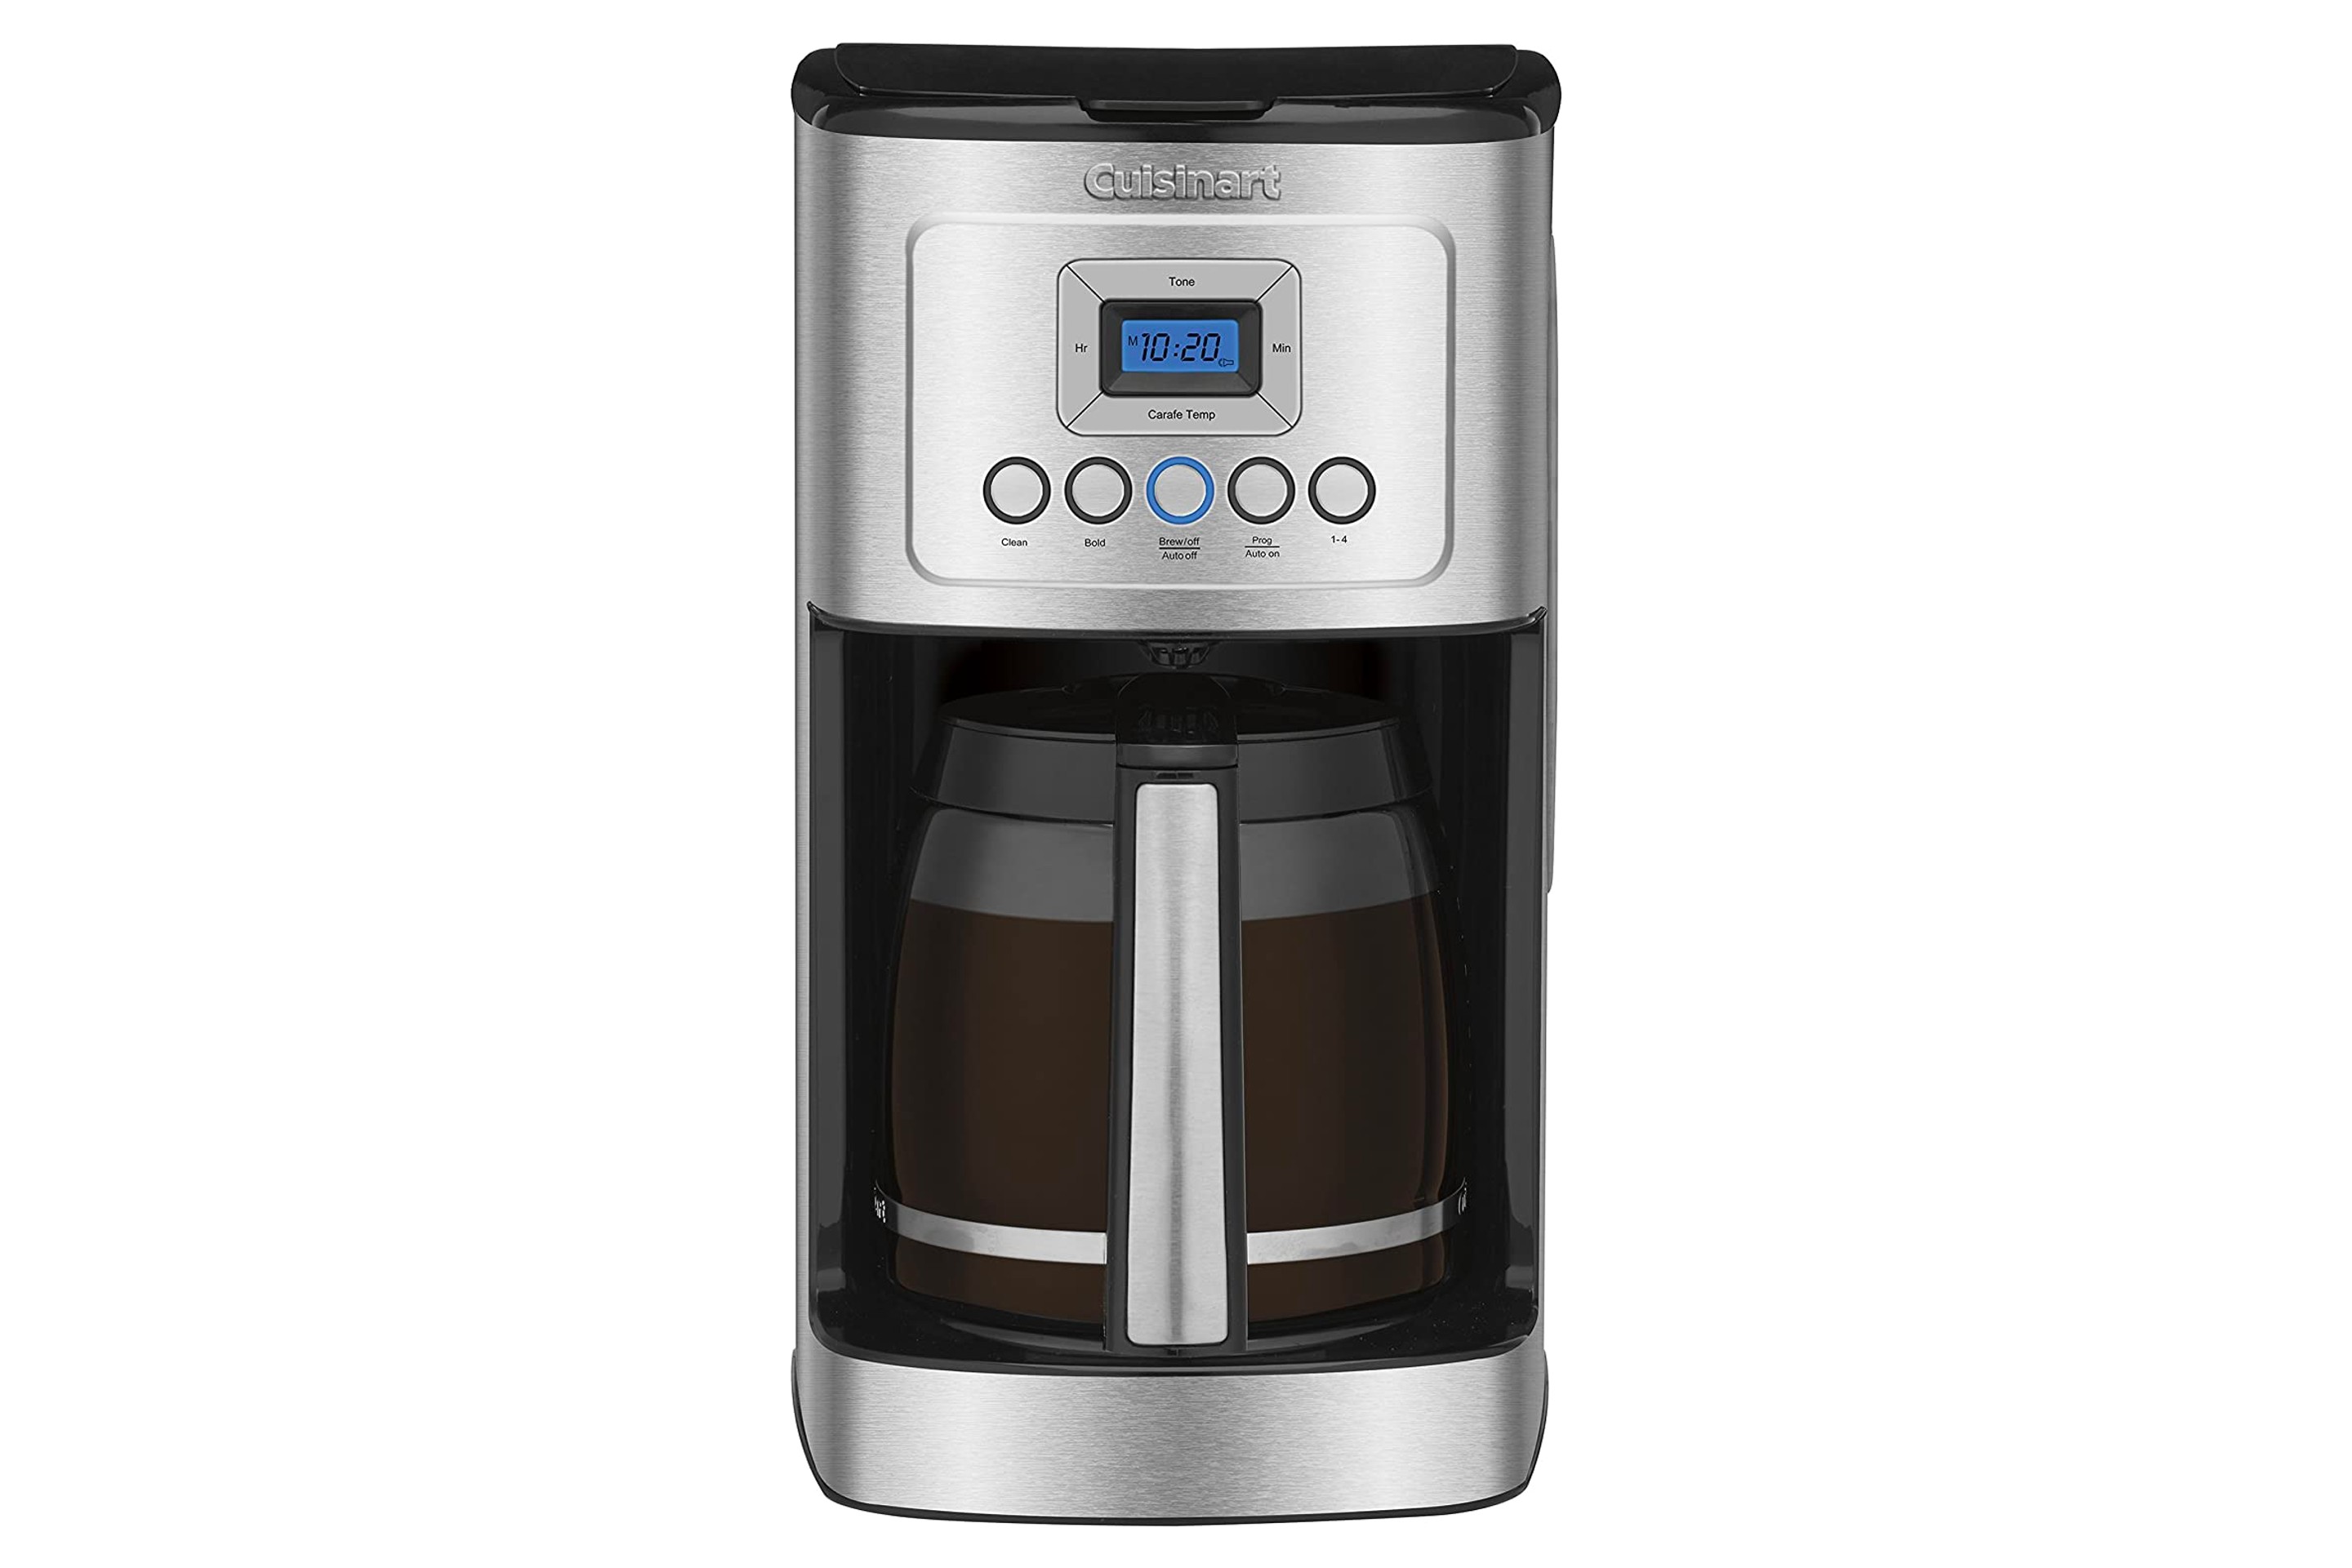 Cuisinart Drip Coffee Maker with five easy-touch buttons